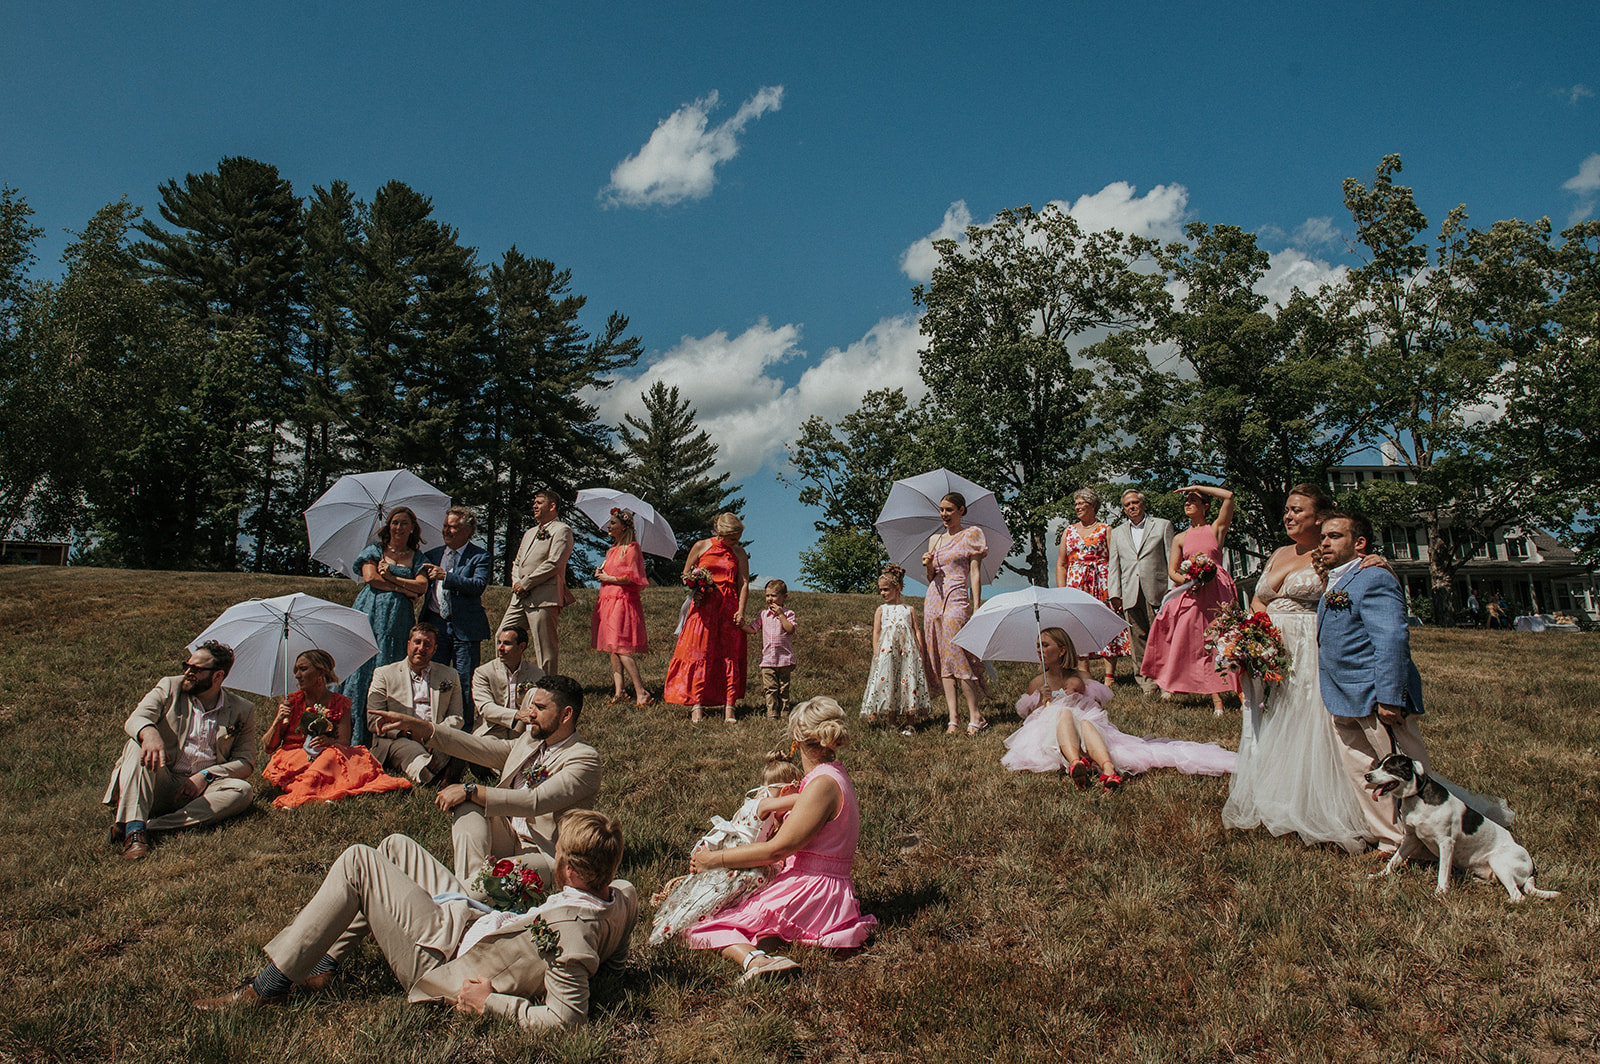 Wedding Party photo at the preserve at chocorua inspired by Seurat's A Sunday Afternoon on the Island of La Grande Jette